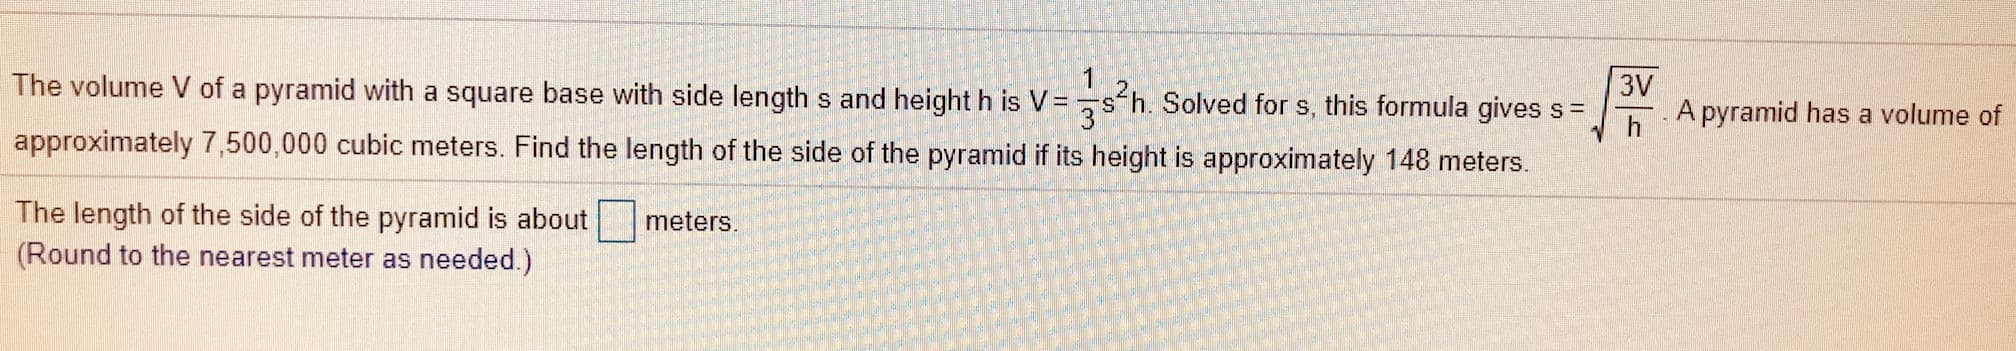 3V
A pyramid has a volume of
The volume V of a pyramid with a square base with side length s and height h is V =
s'h. Solved for s, this formula gives s =
approximately 7,500,000 cubic meters. Find the length of the side of the pyramid if its height is approximately 148 meters.
h
